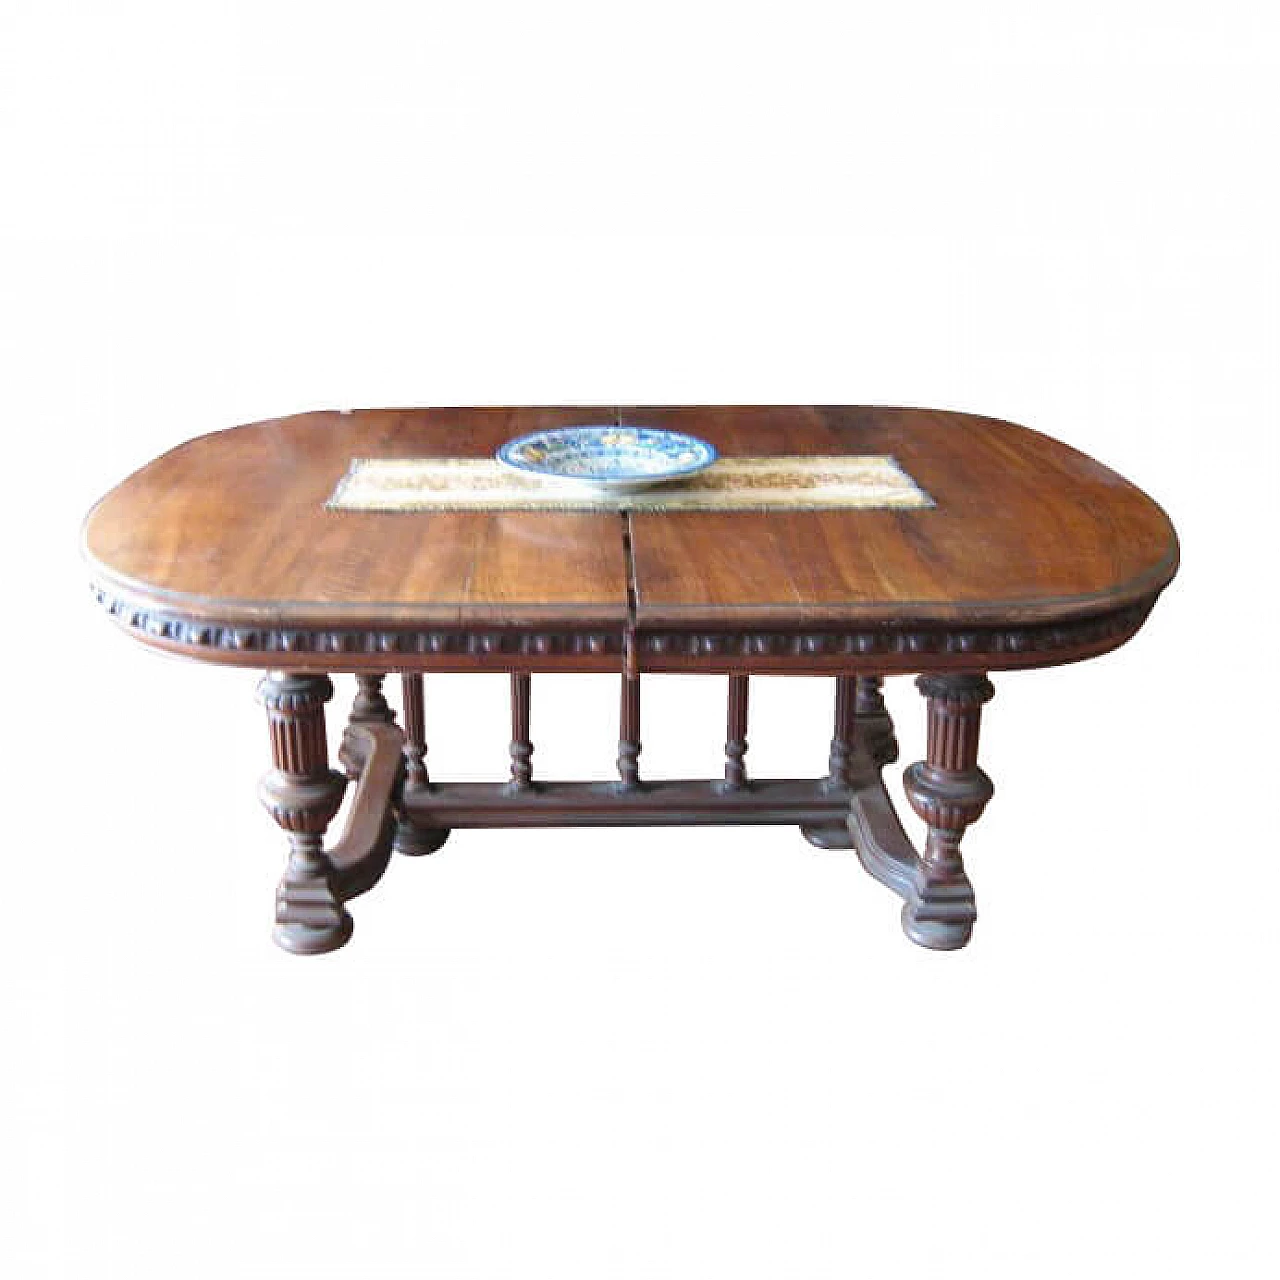 Extending table in solid walnut, 19th century 1363217